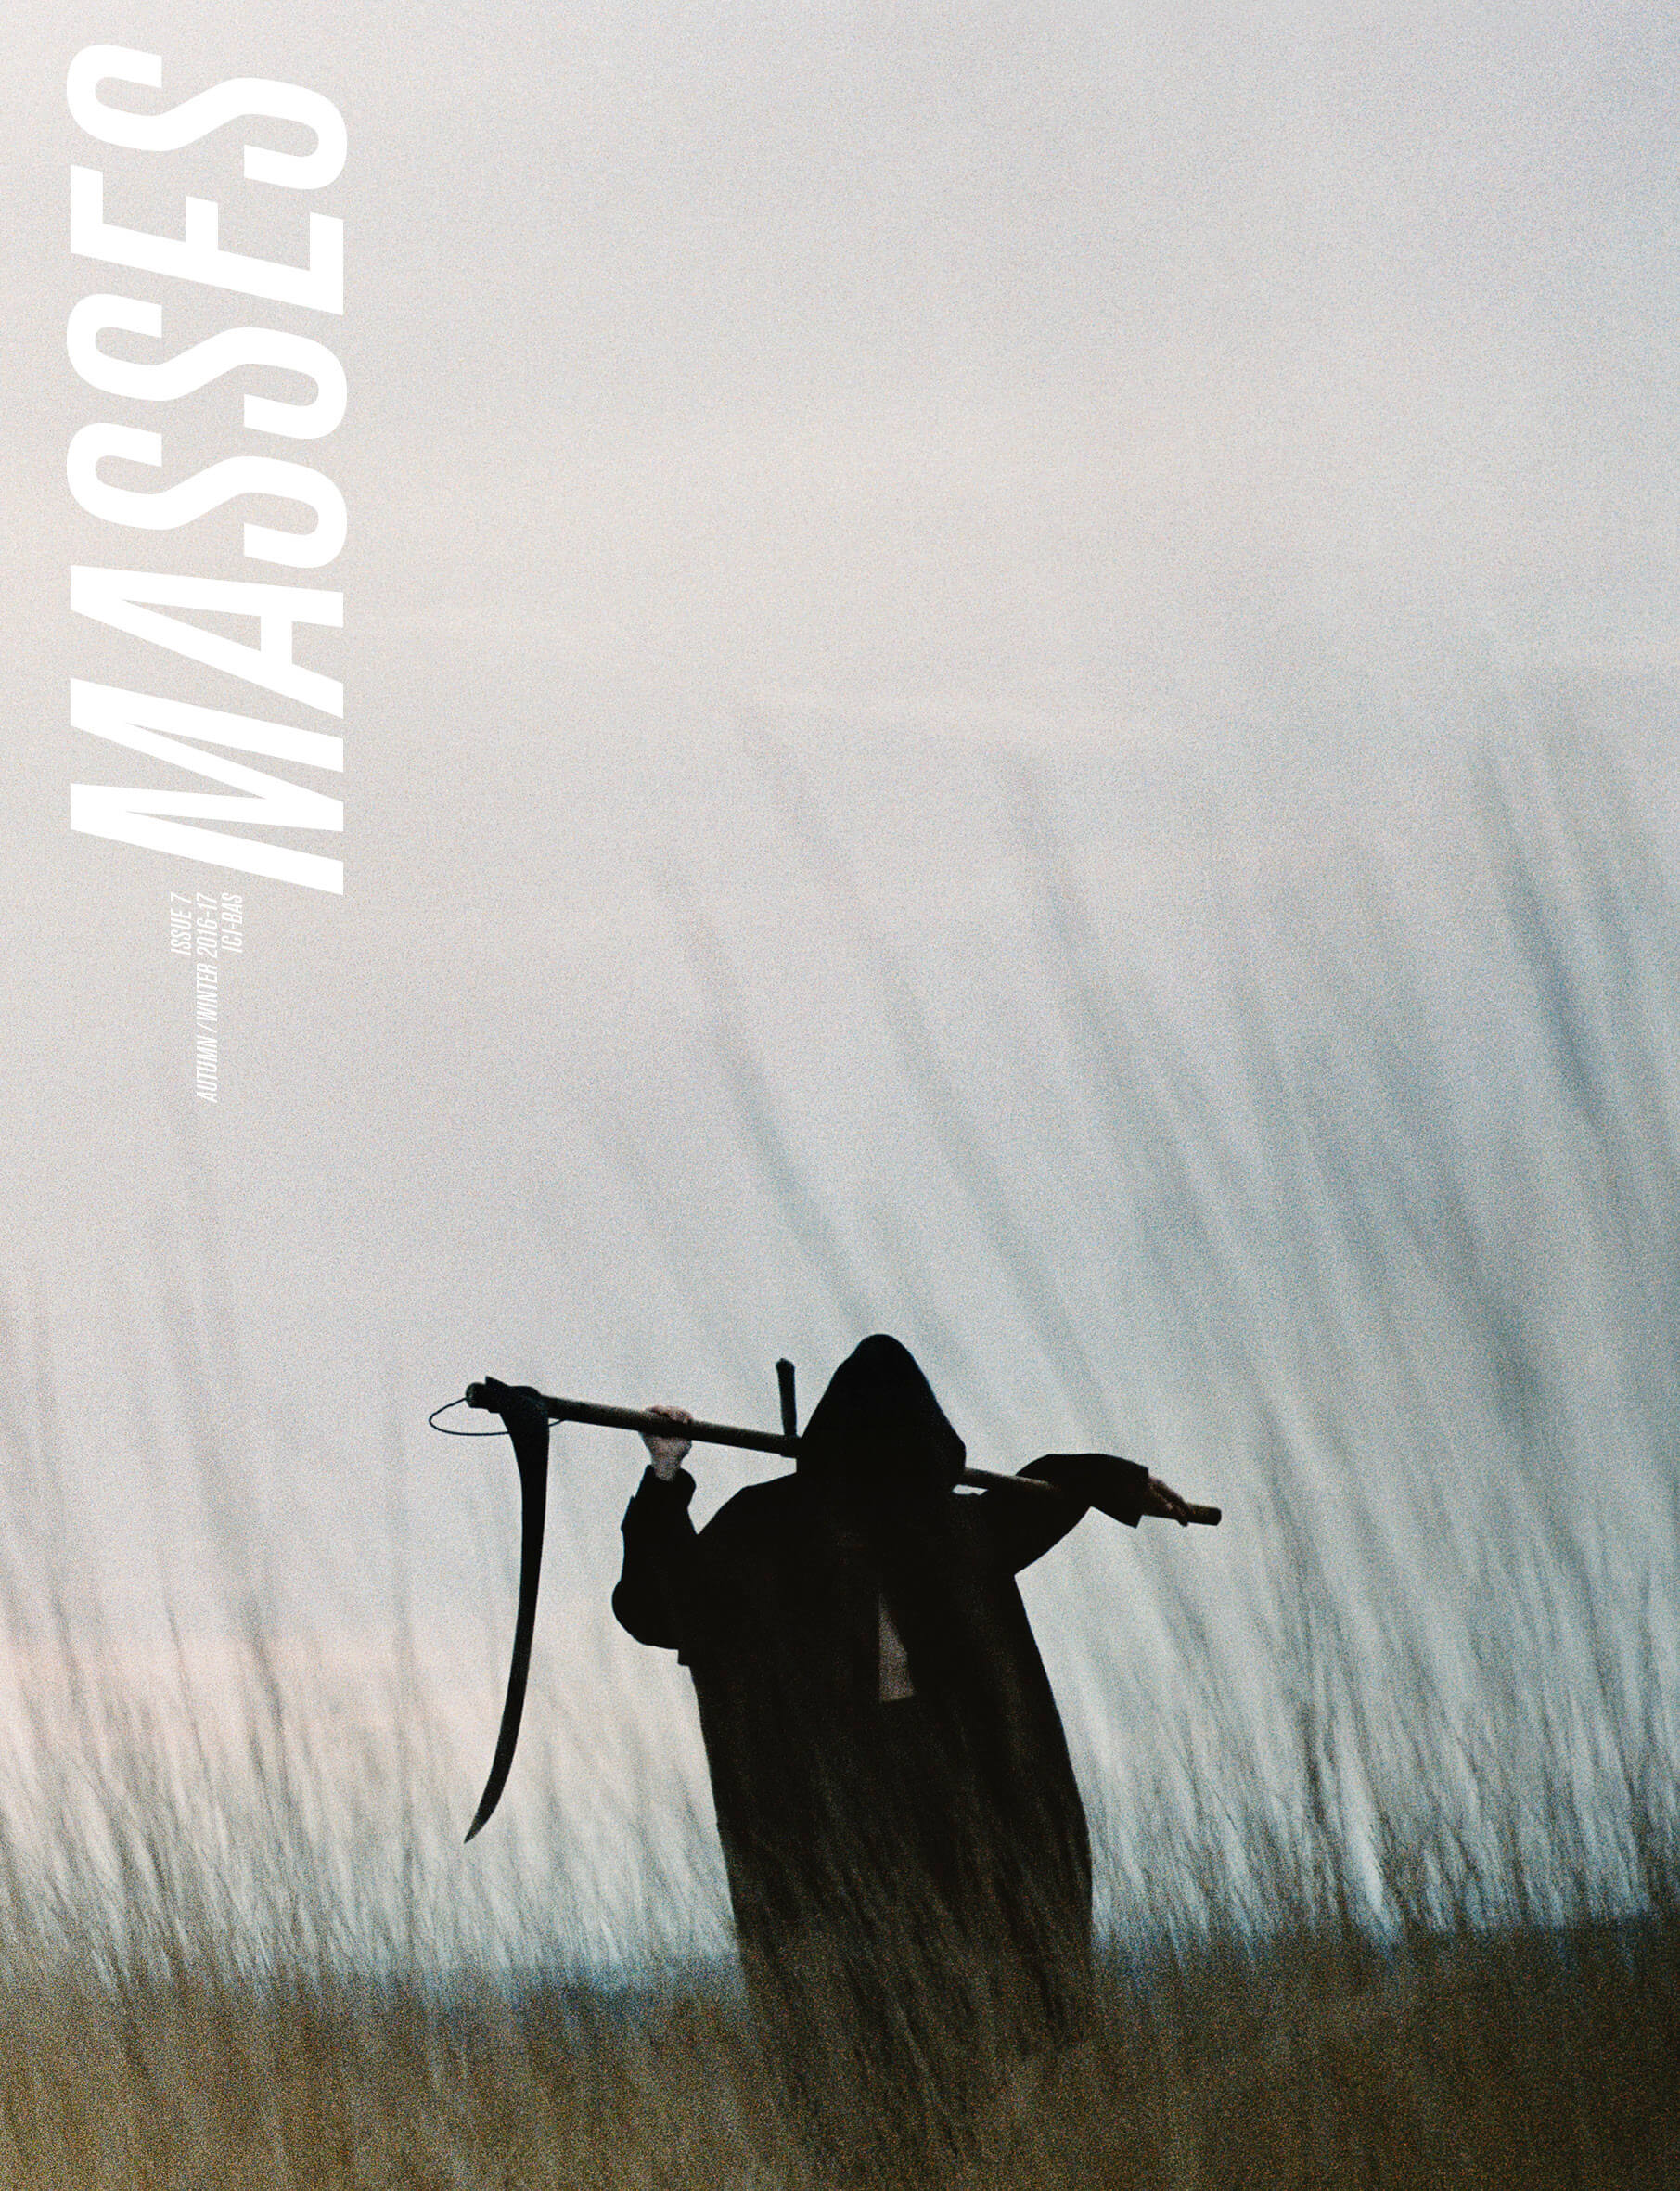 MASSES Magazine Issue No. 7 – Cover photographed by CG Watkins and Eric Diulein & Sacha Quintin with Daniel Lucien at Tomorrow Is Another Day wearing Dries Van Noten